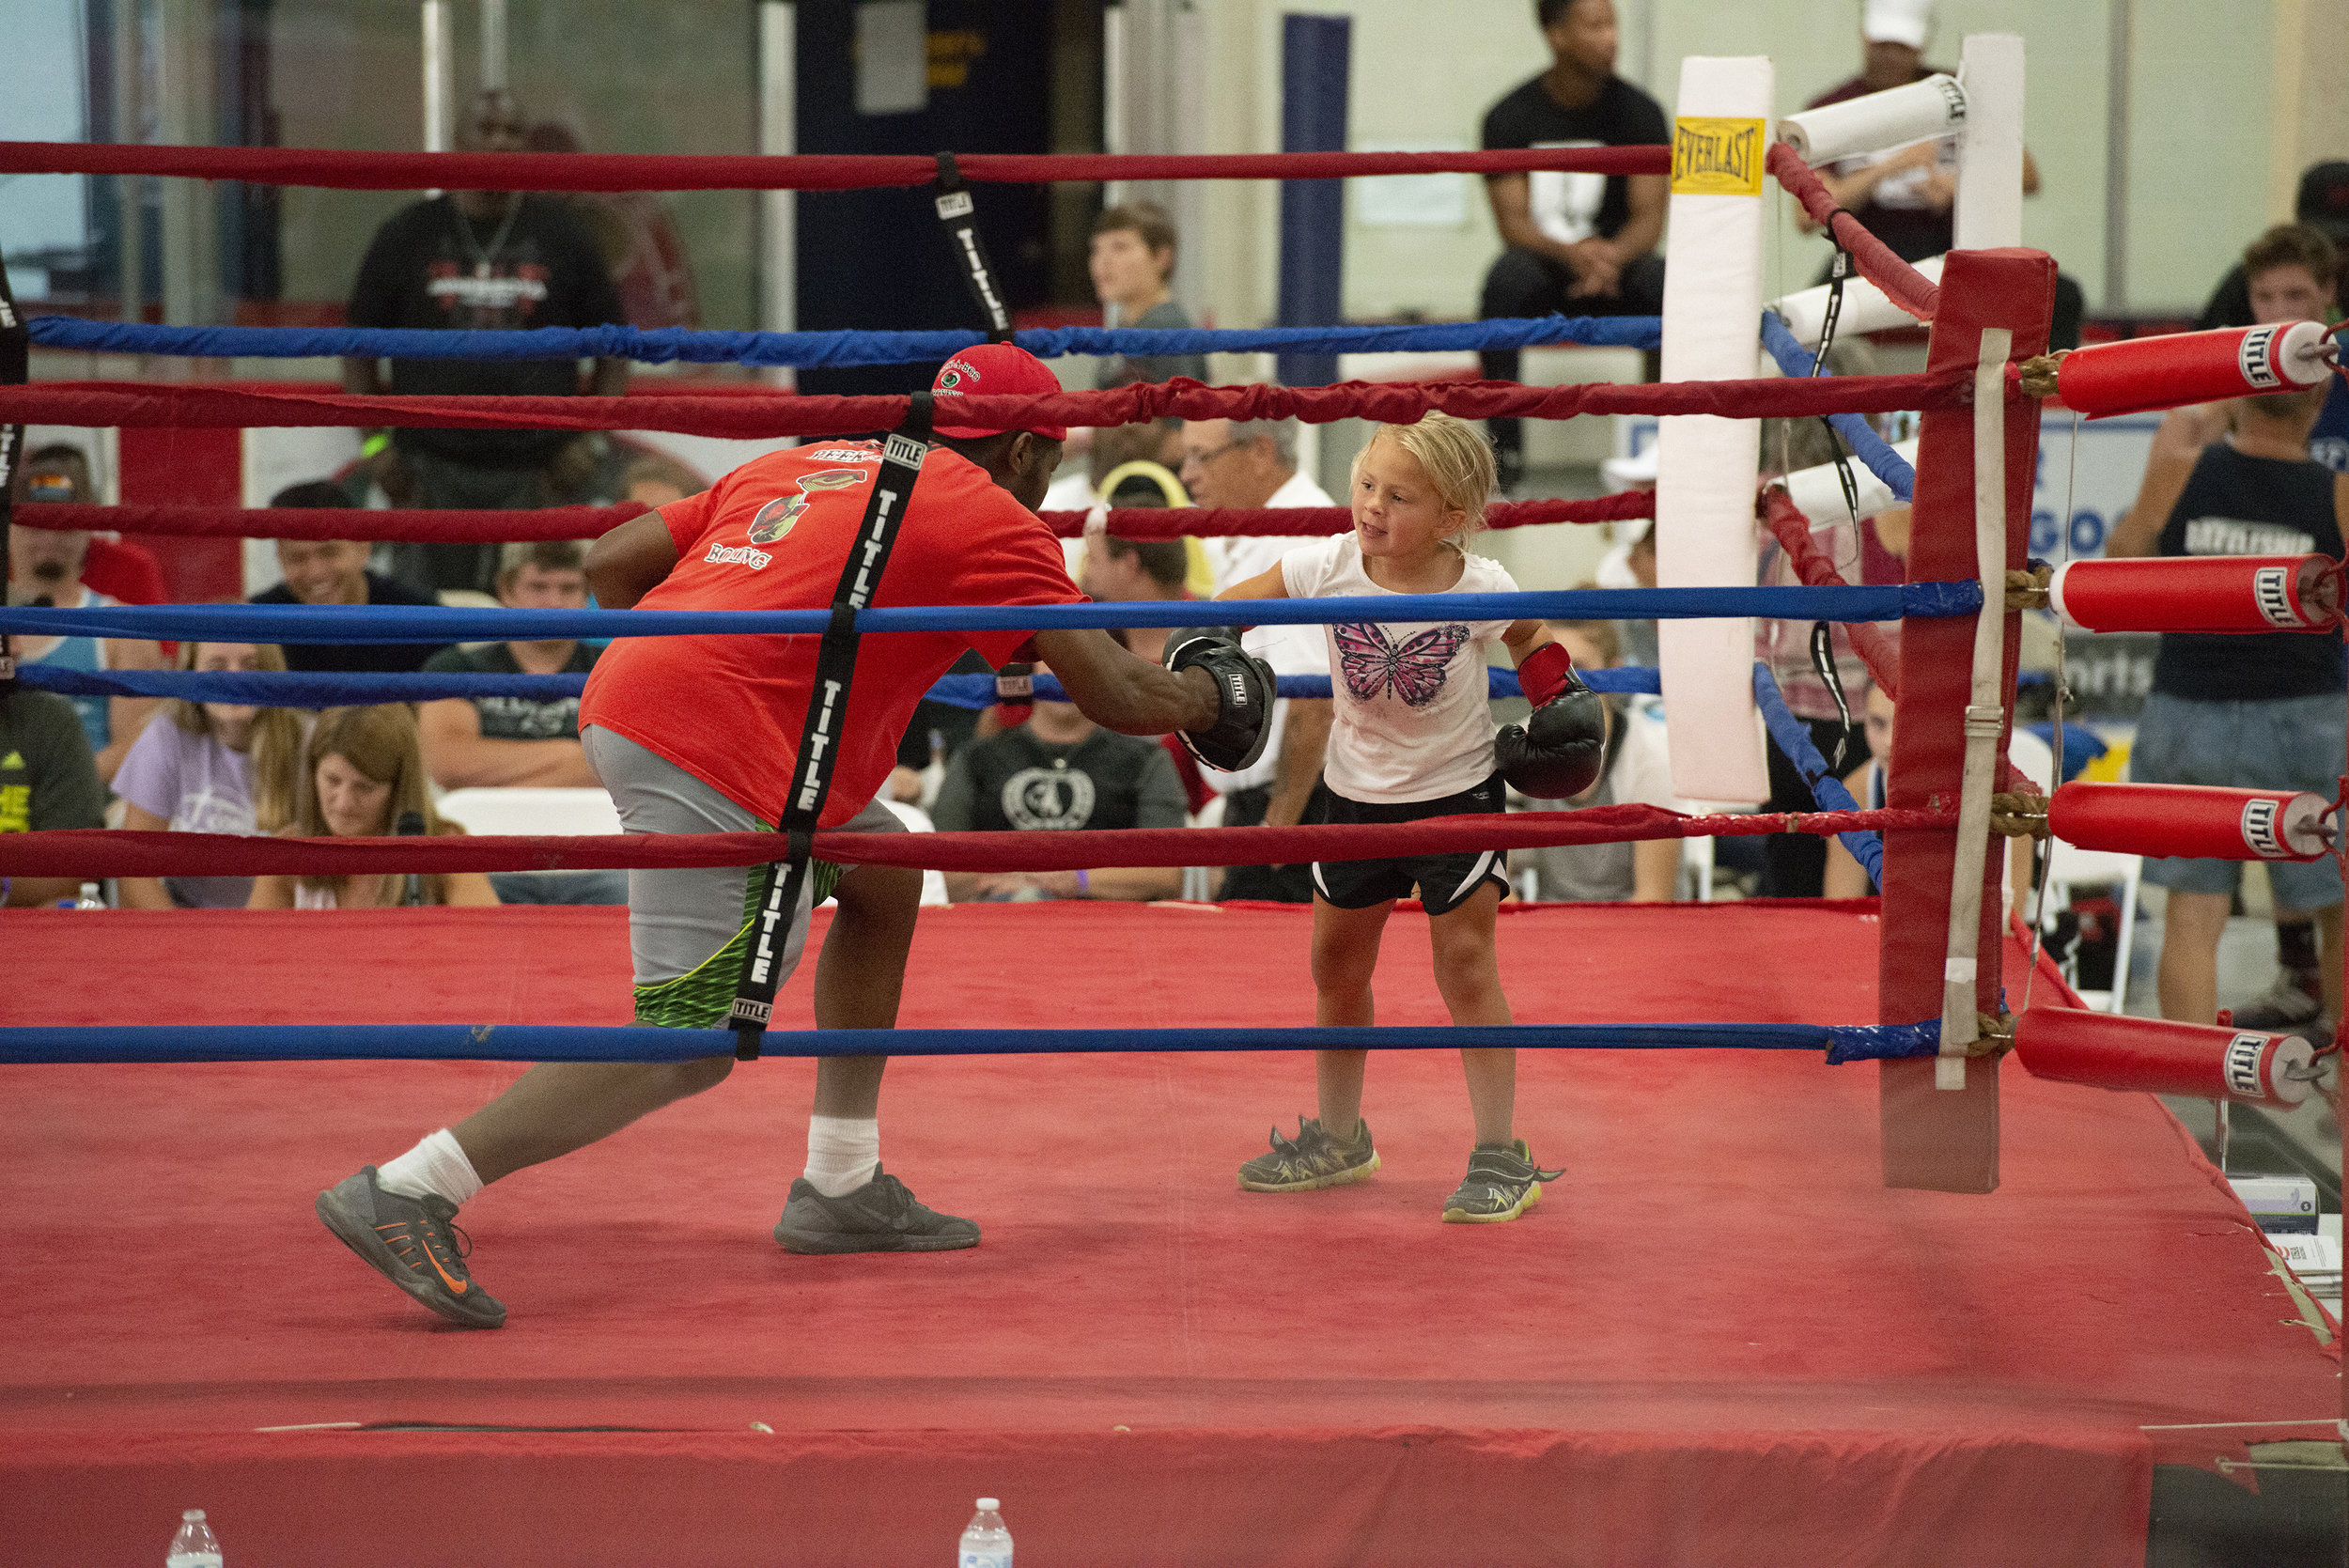 Boxing_Show5_Reverie_photography_Peek-a-Boo_Boxing_Gym_River Falls.jpg